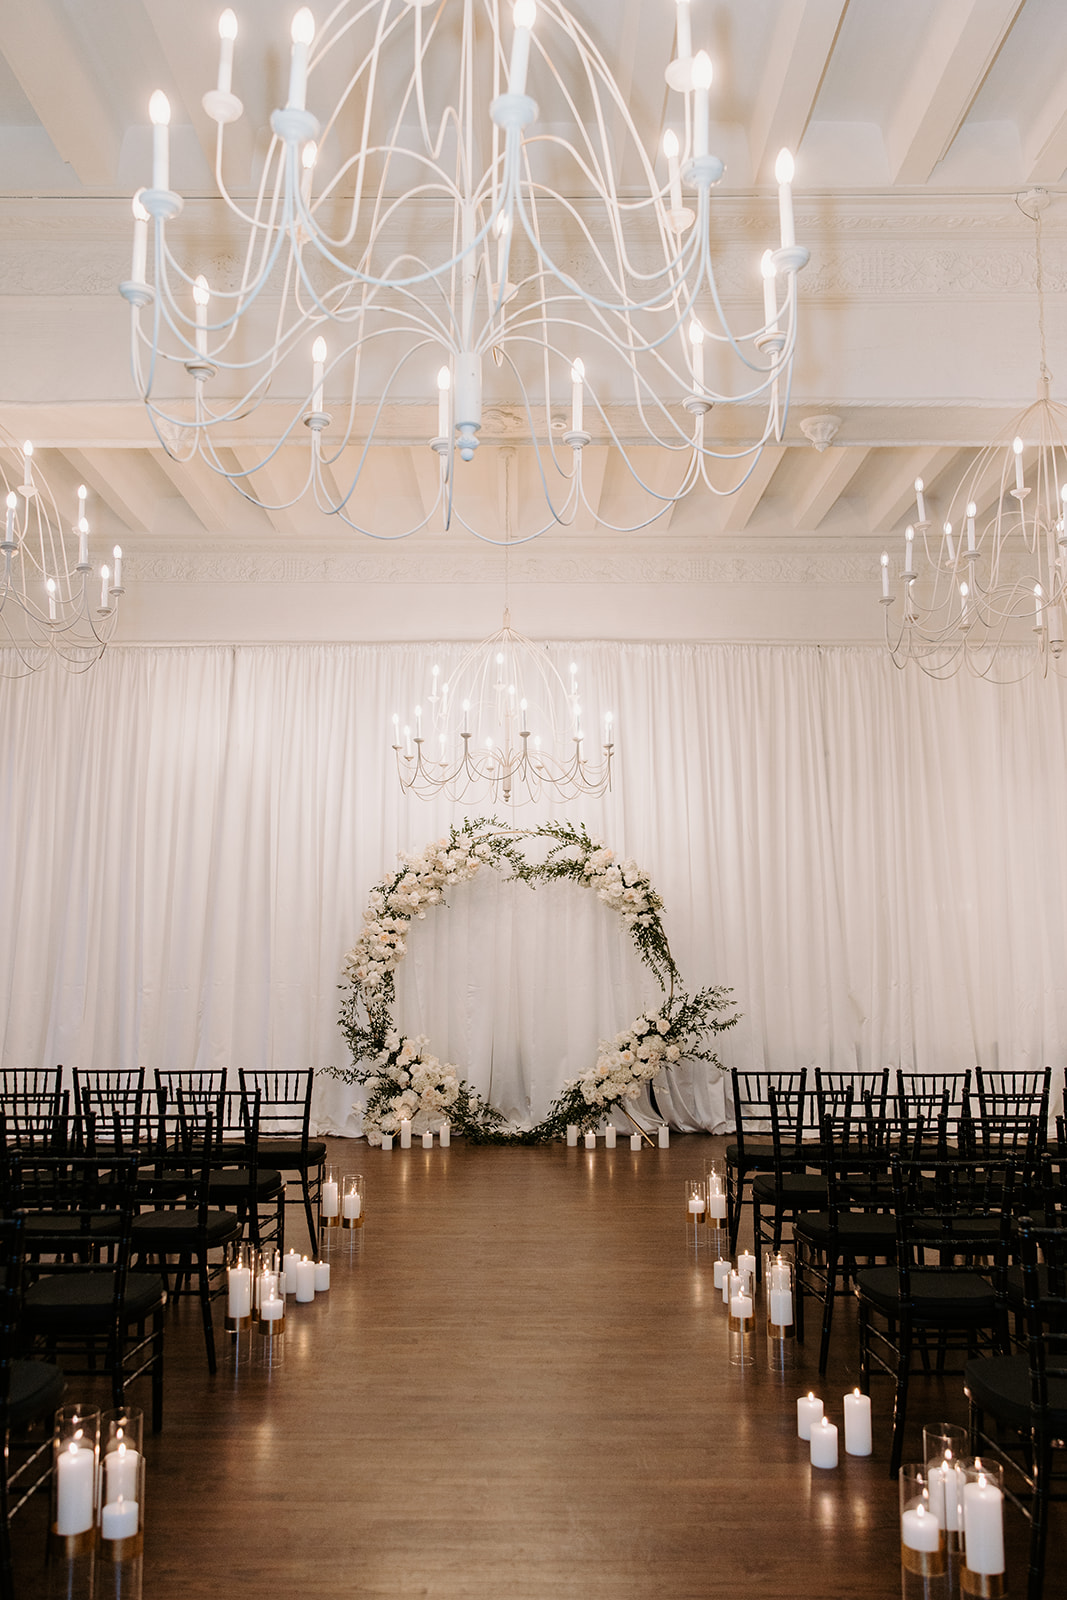 Arbor adorned with White Flowers in the ceremony room with black chairs and white candles on the floor.